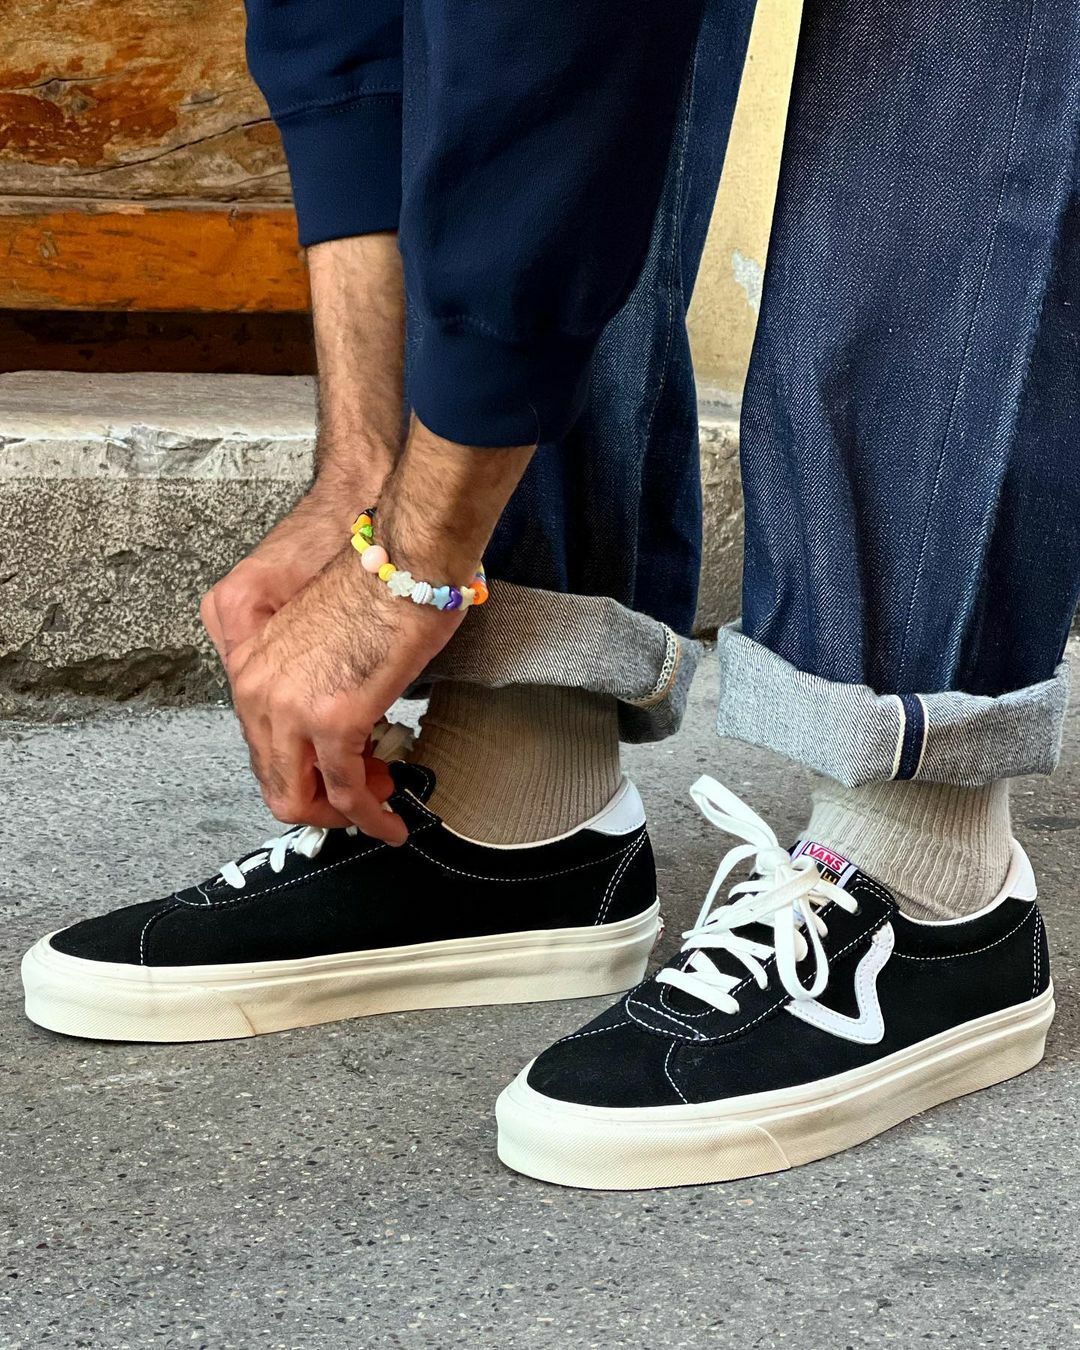 Conquer bunker Jolly Vans Styles, Fit and History | Vans Buyers Guide - AllSole